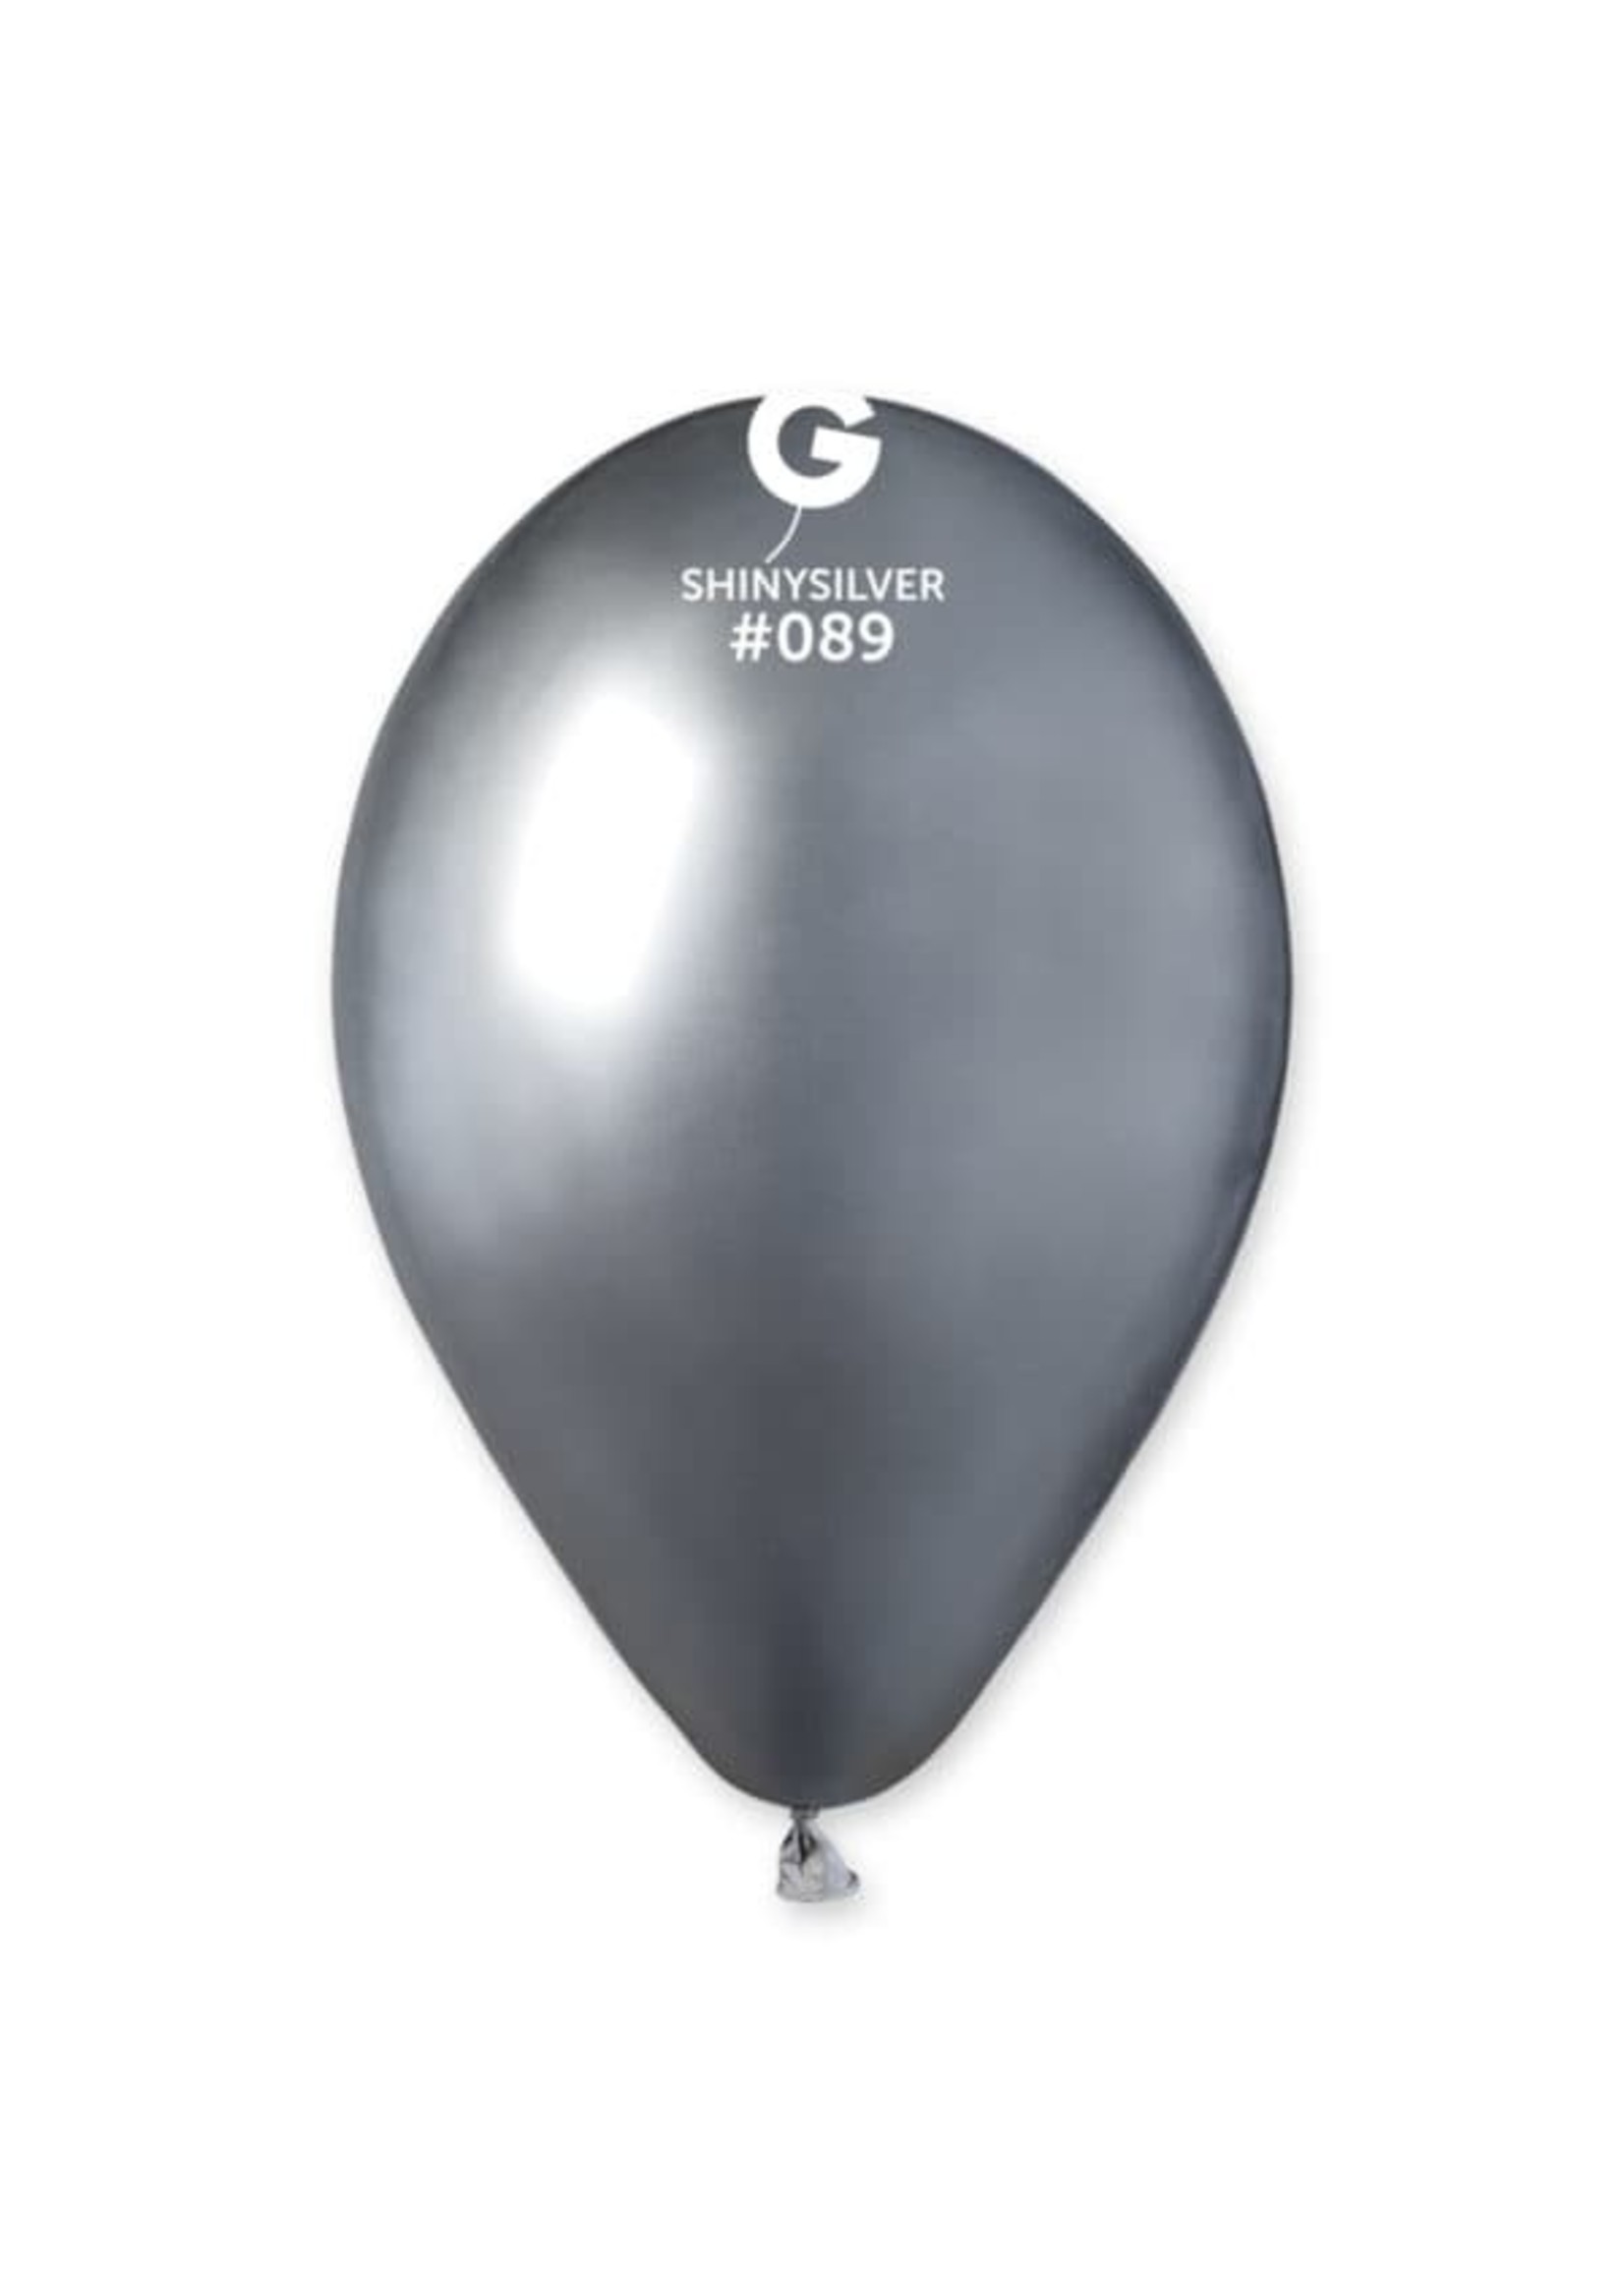 GEMAR Shiny Silver #089 Latex Balloons, 13in, 25ct